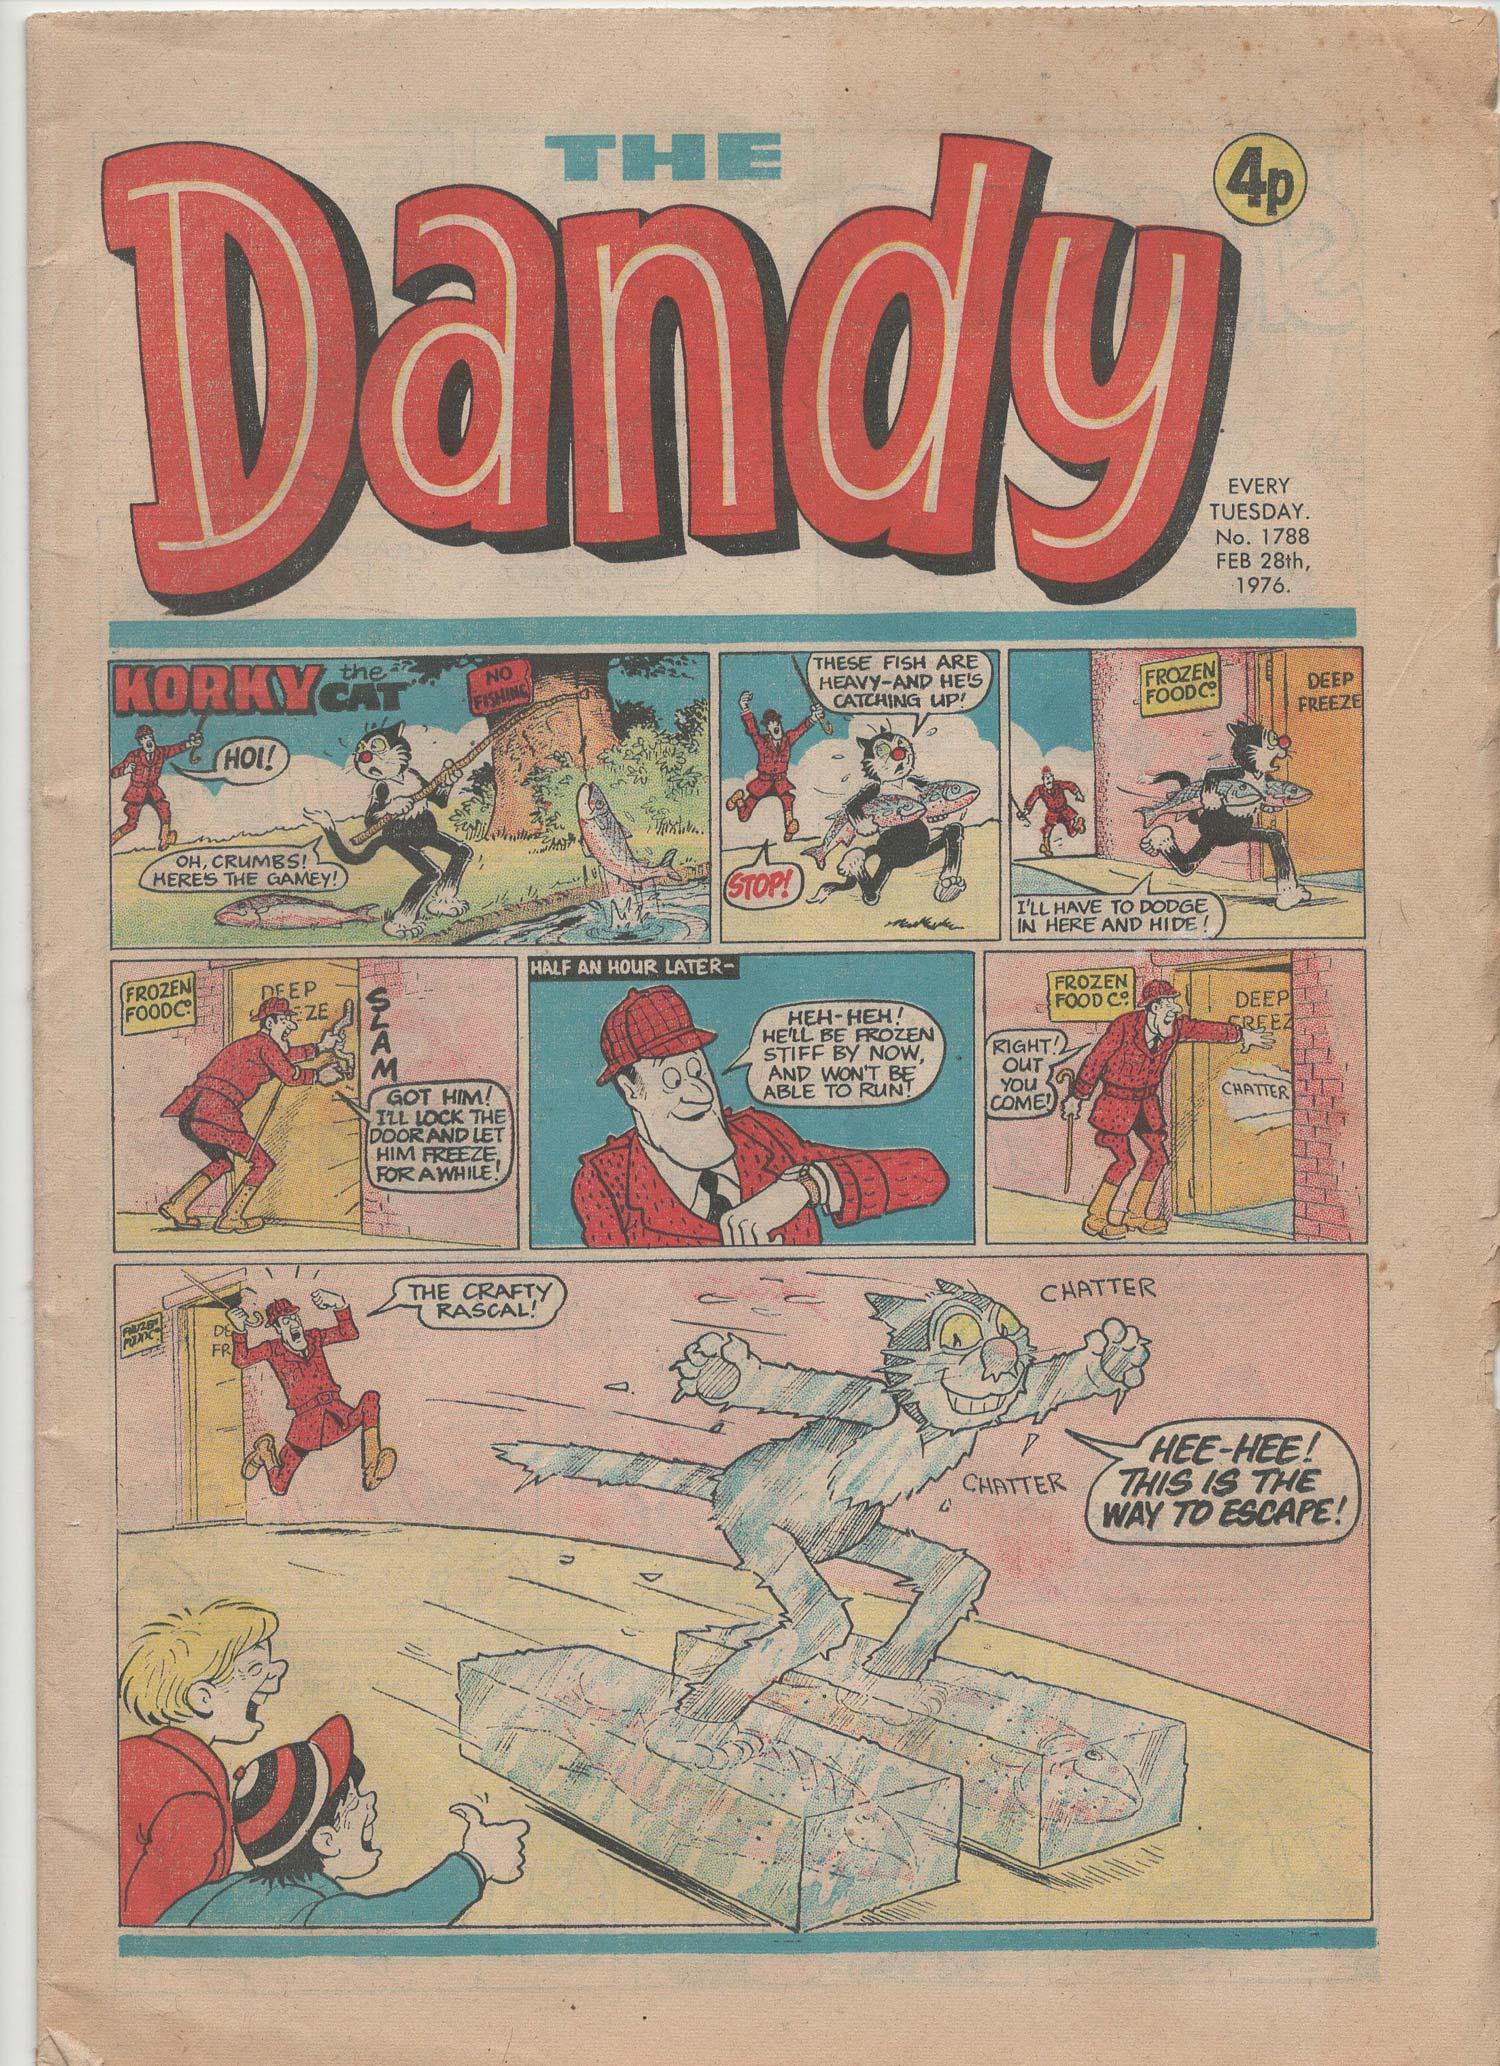 Collectible Comic  Listing: Dandy Issue Number 1788 (28th February 1976)